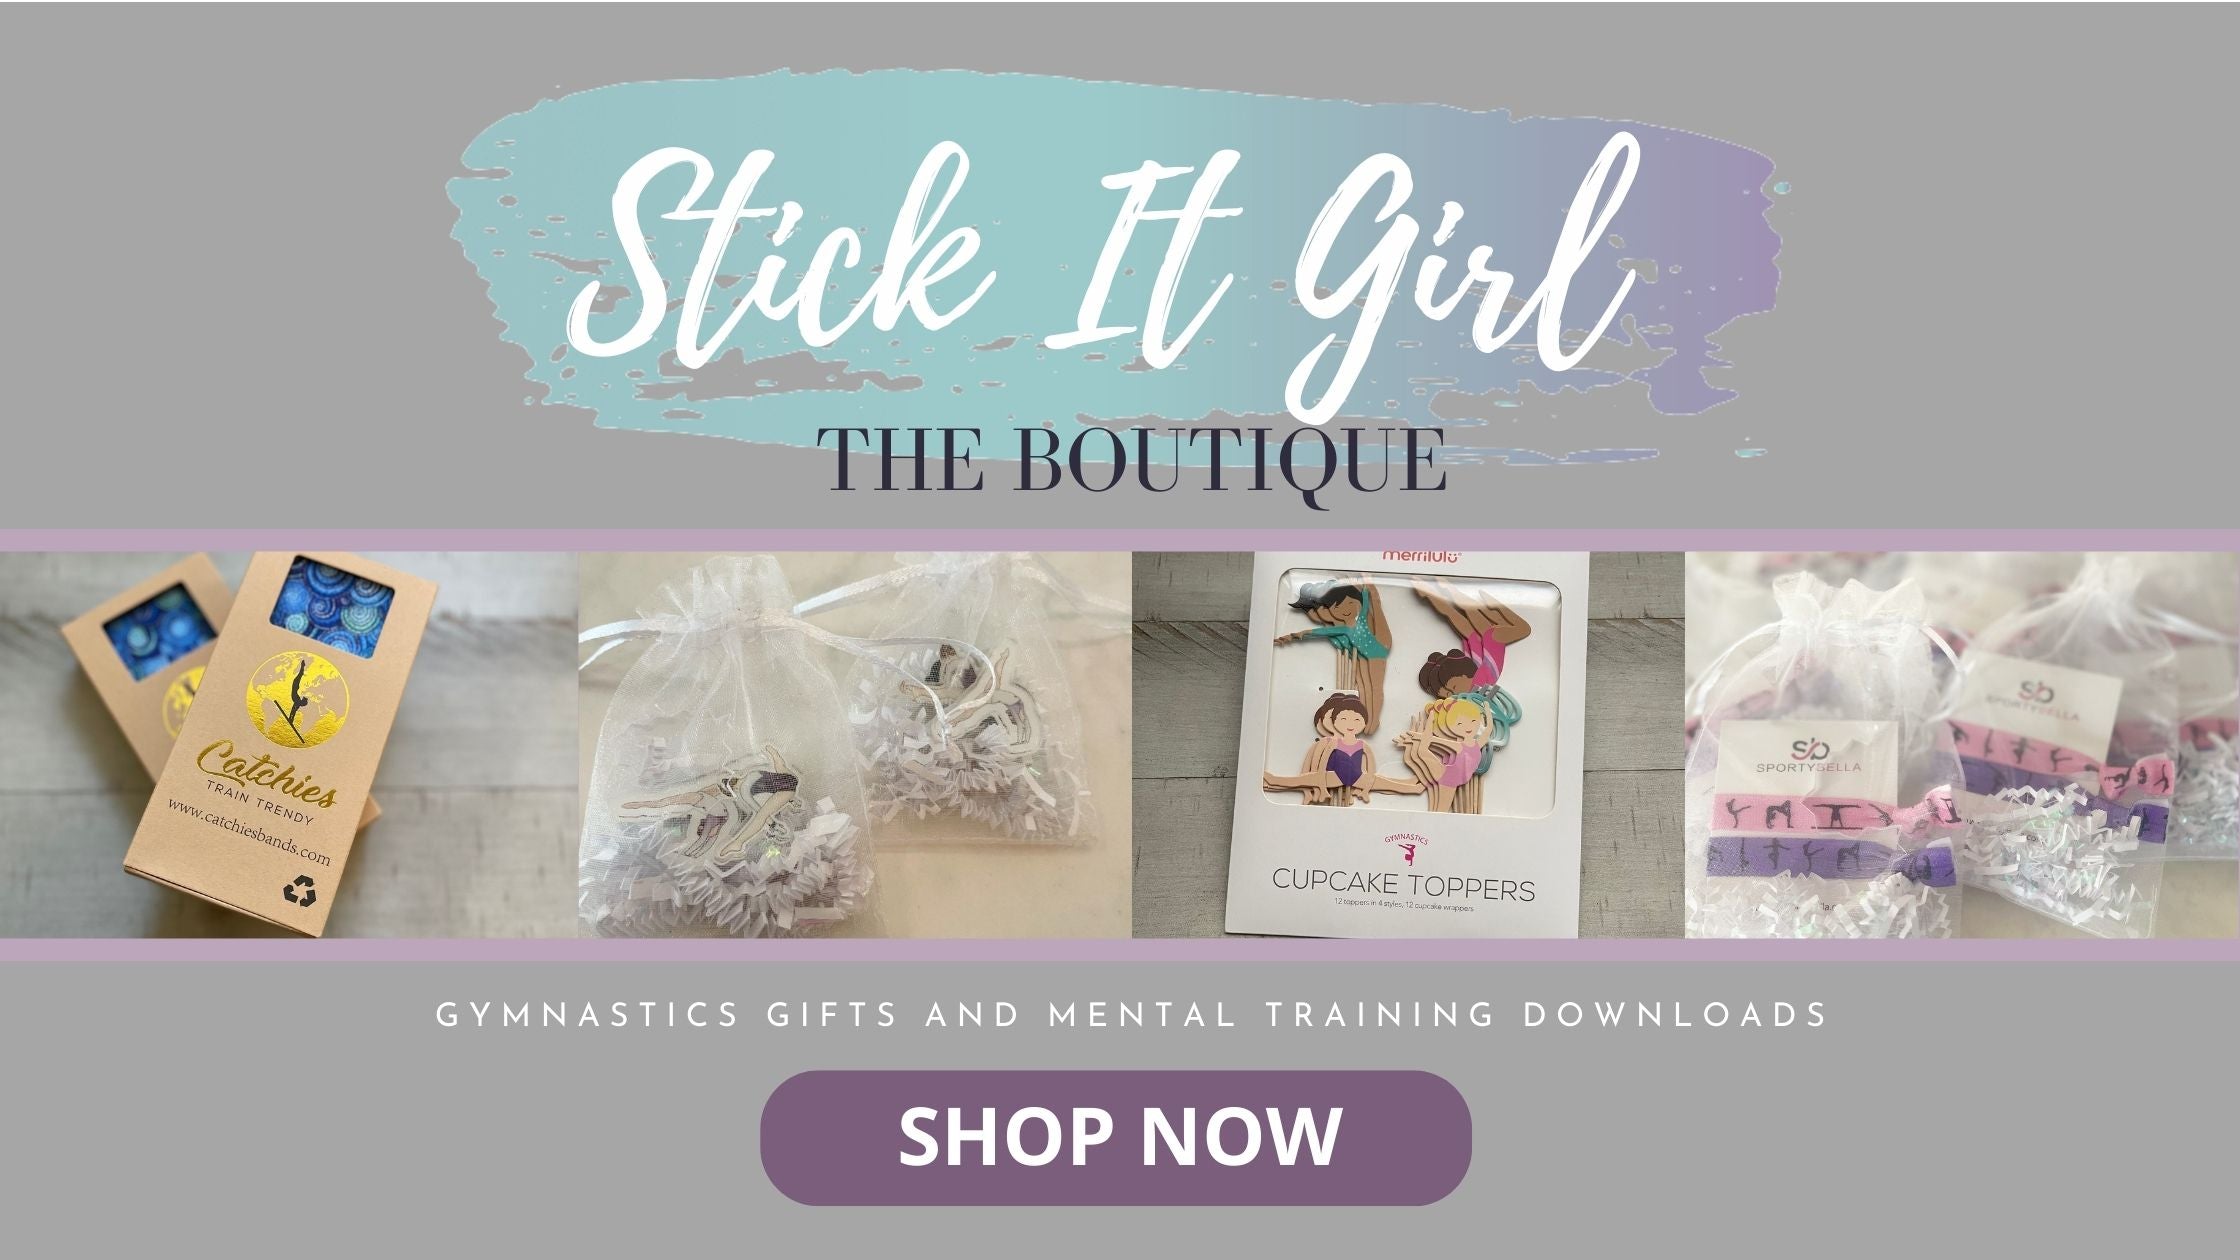 Stick It Girl Boutique - gymnastics gifts and accessories